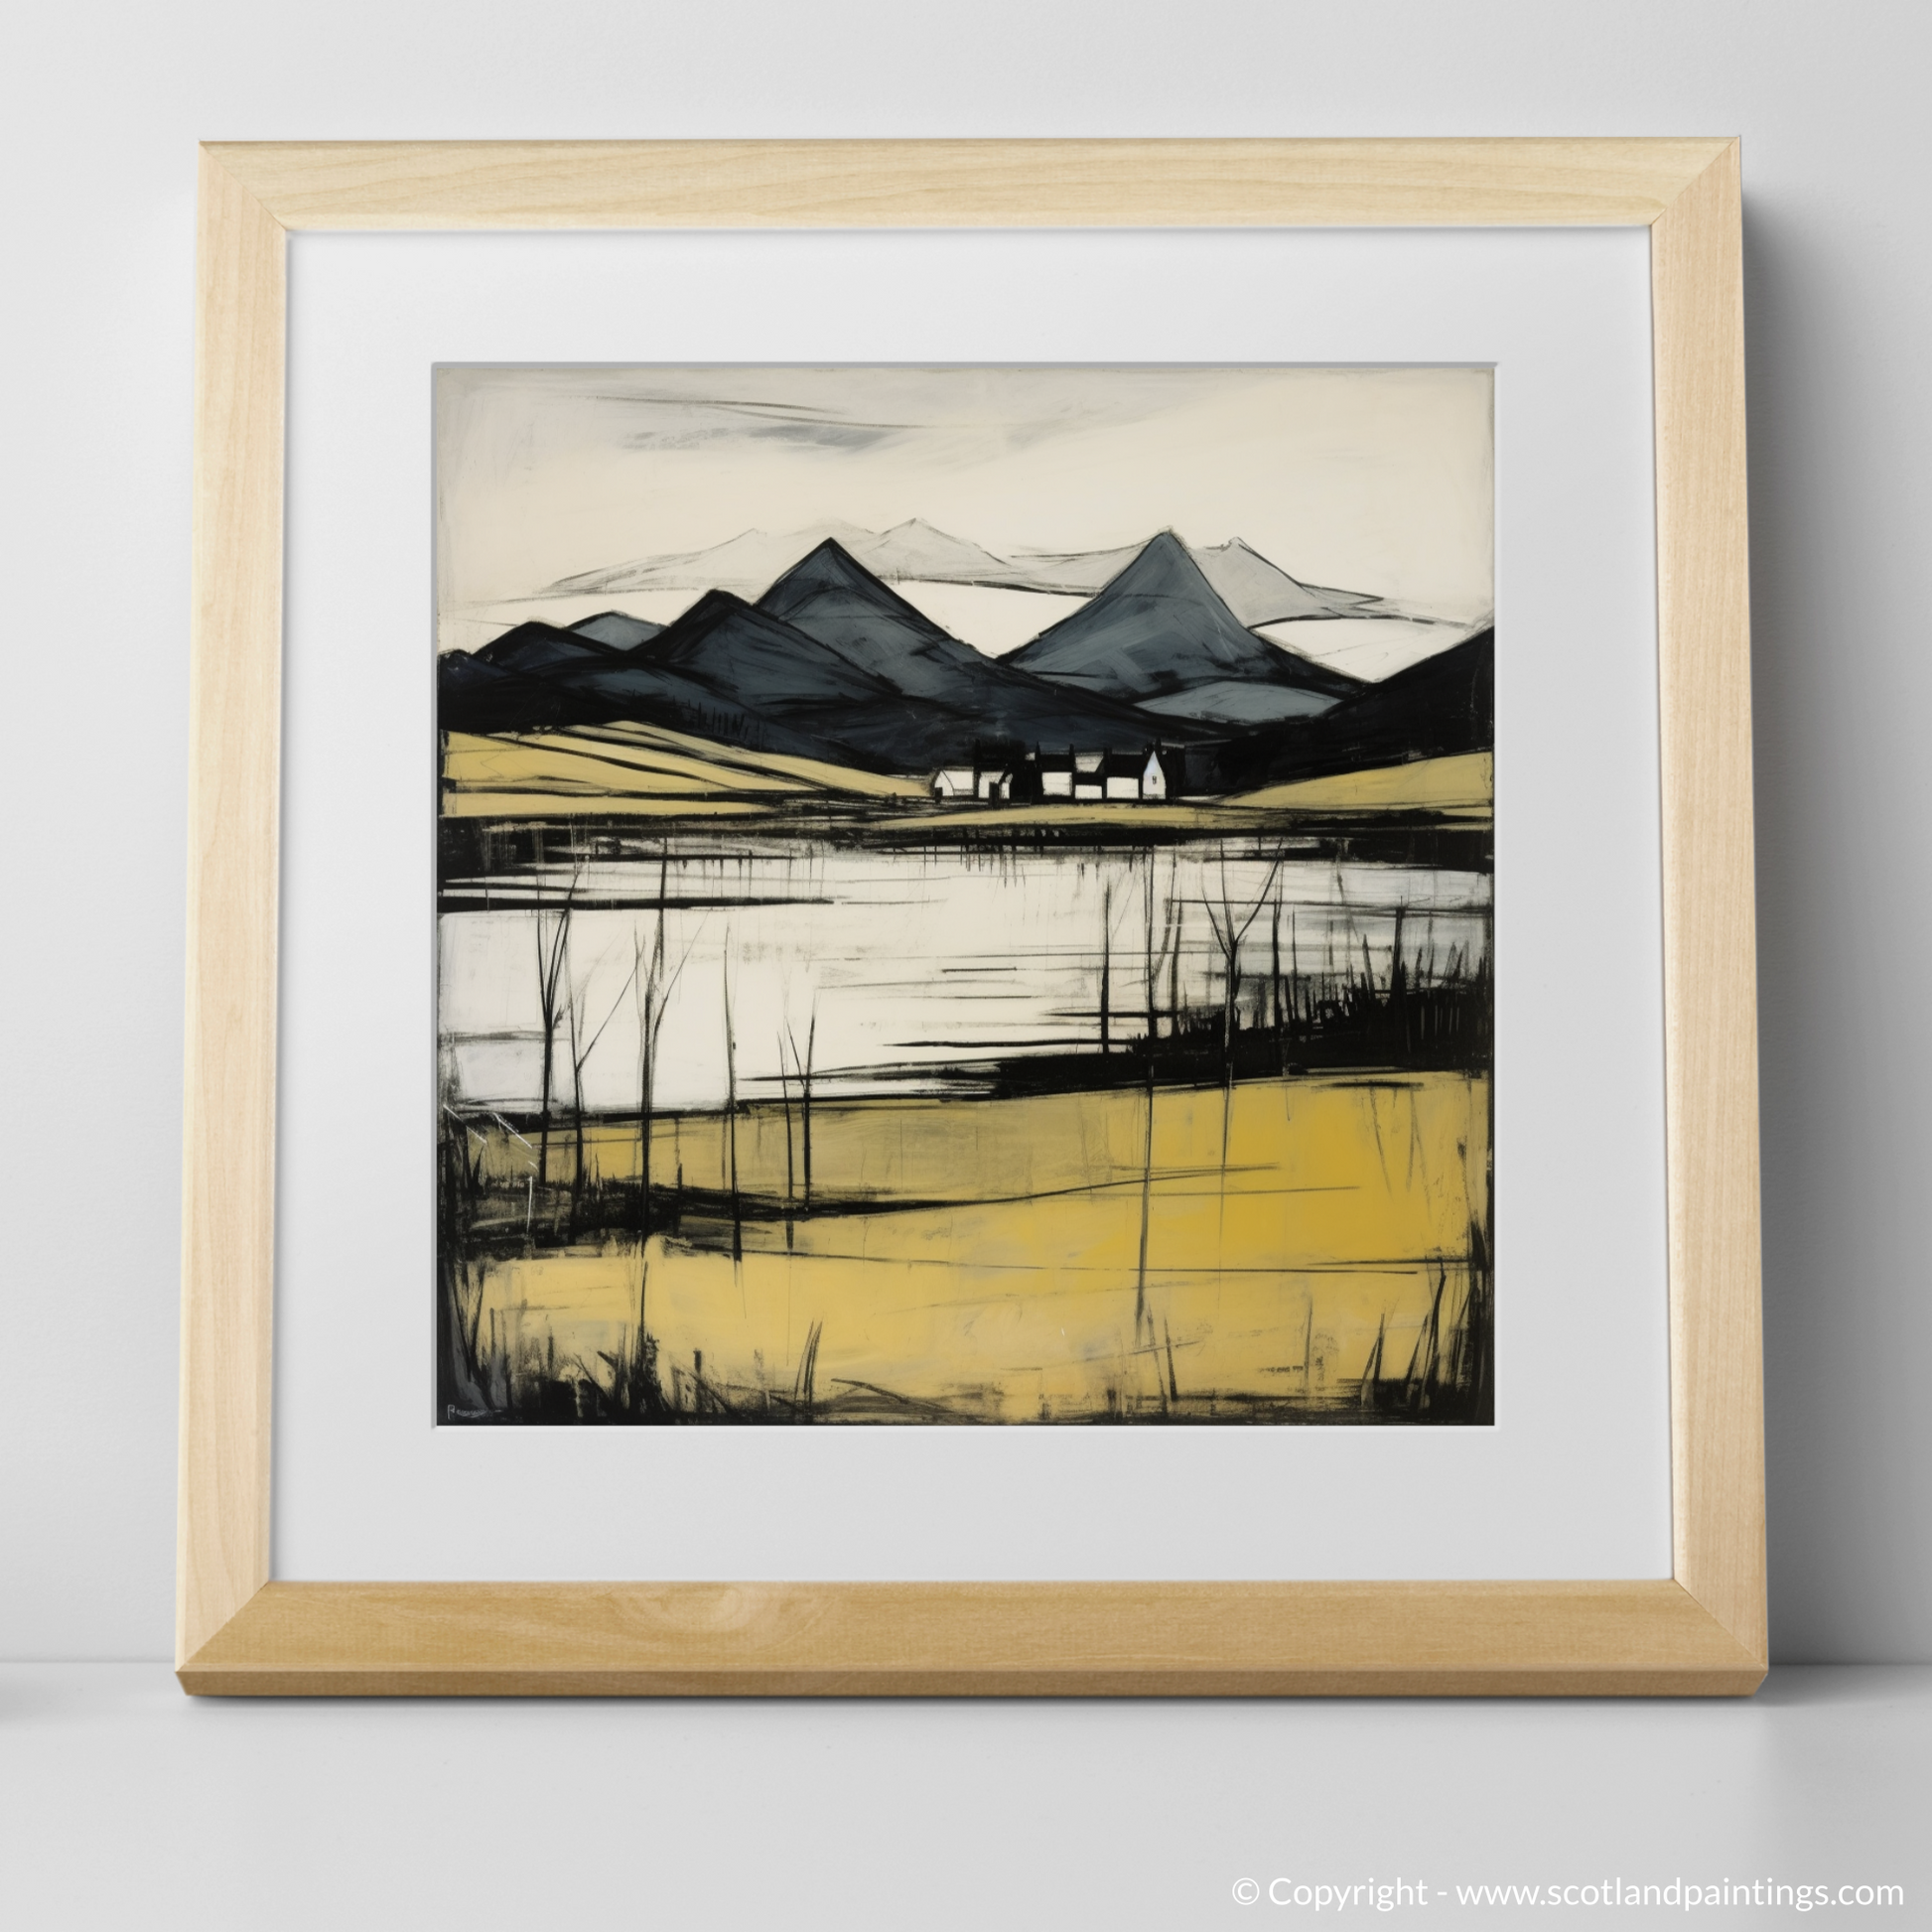 Art Print of Loch Awe, Argyll and Bute with a natural frame